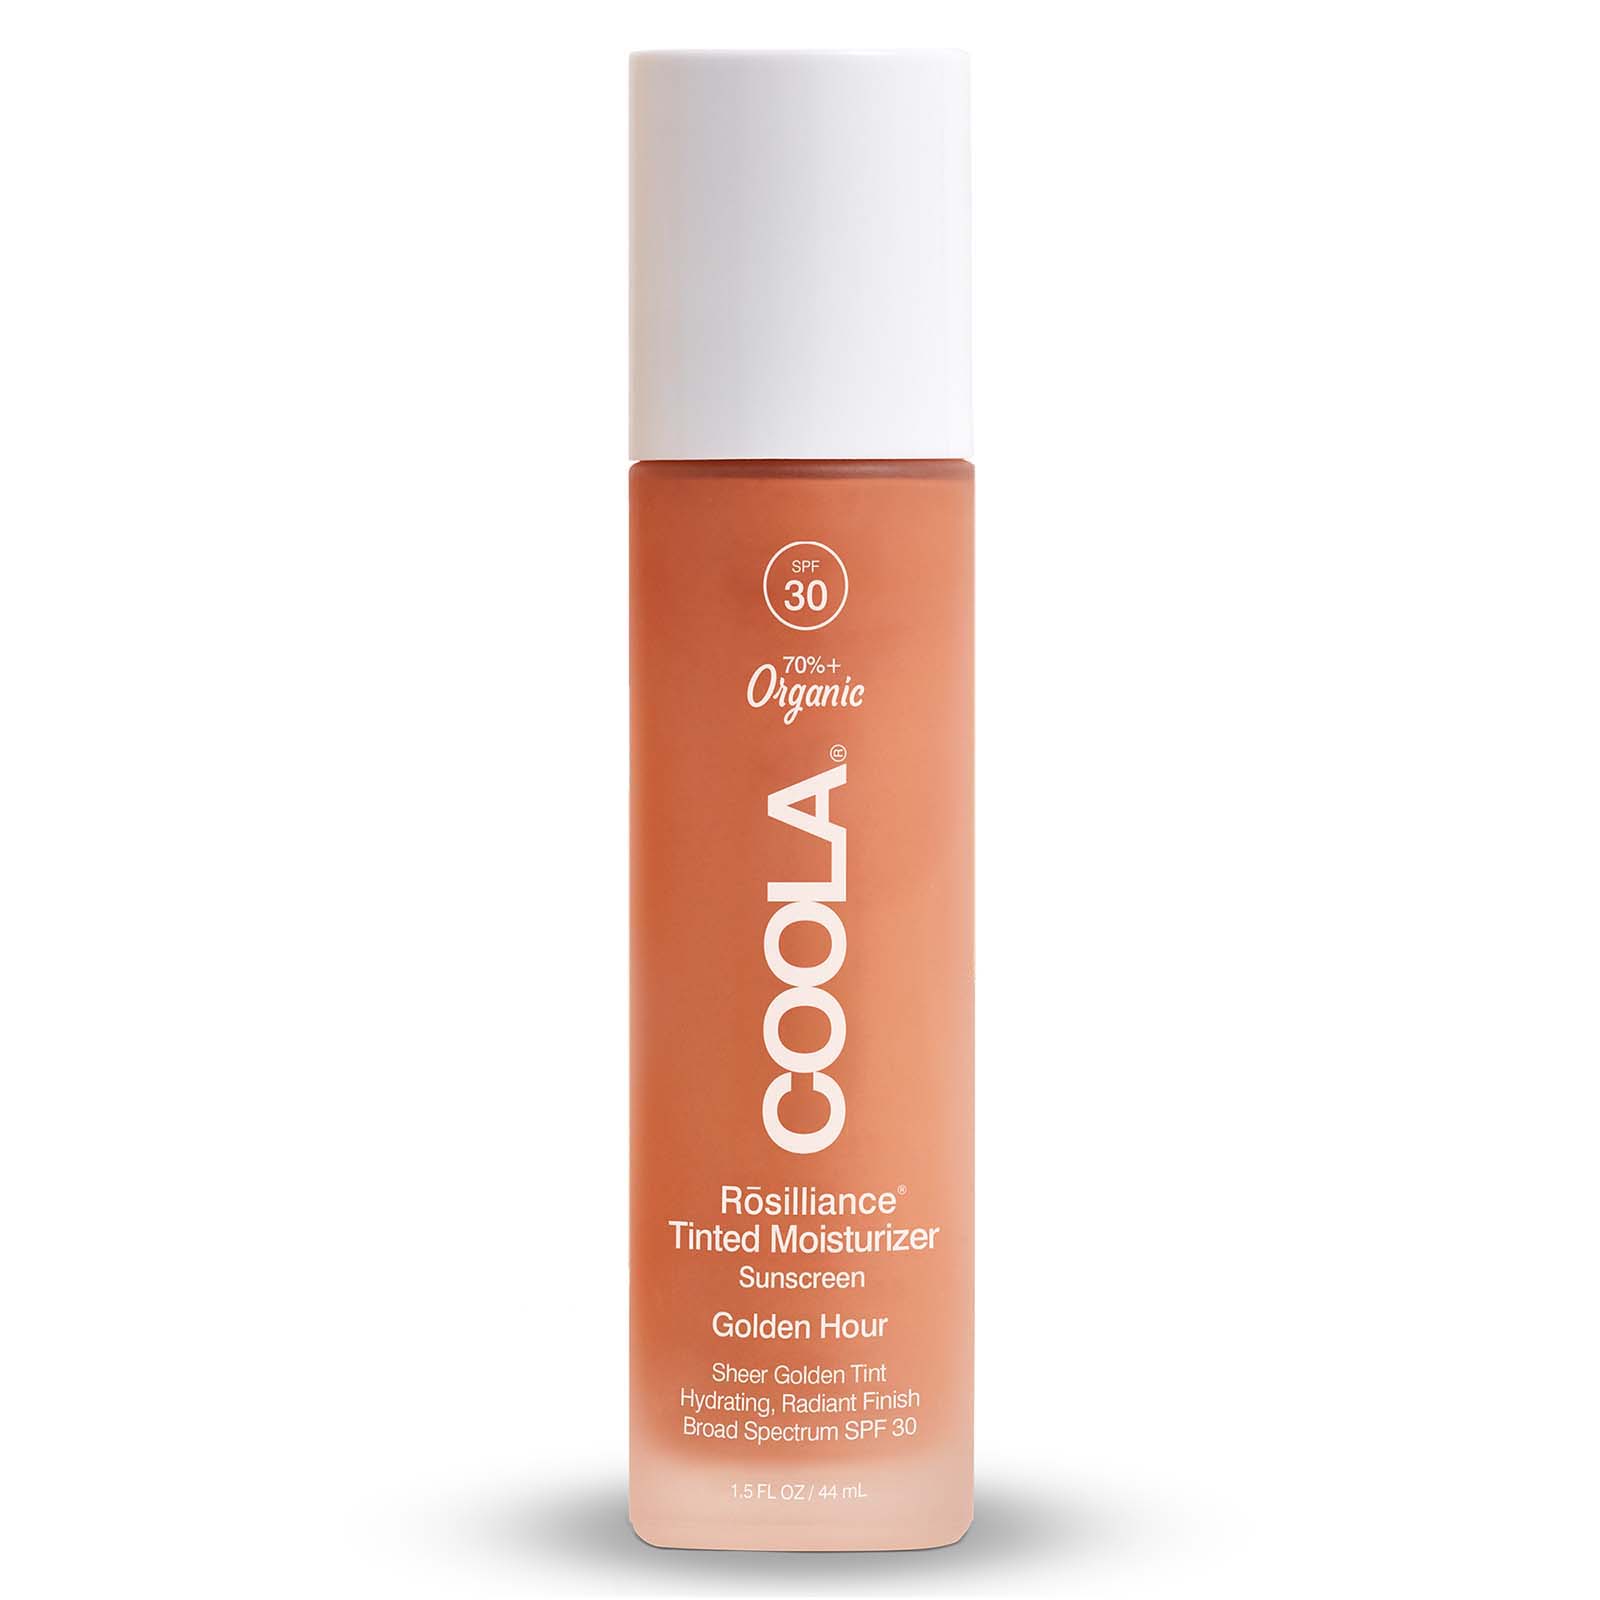 COOLA Mineral Face Rosiliance Golden Tint SPF30 44ml